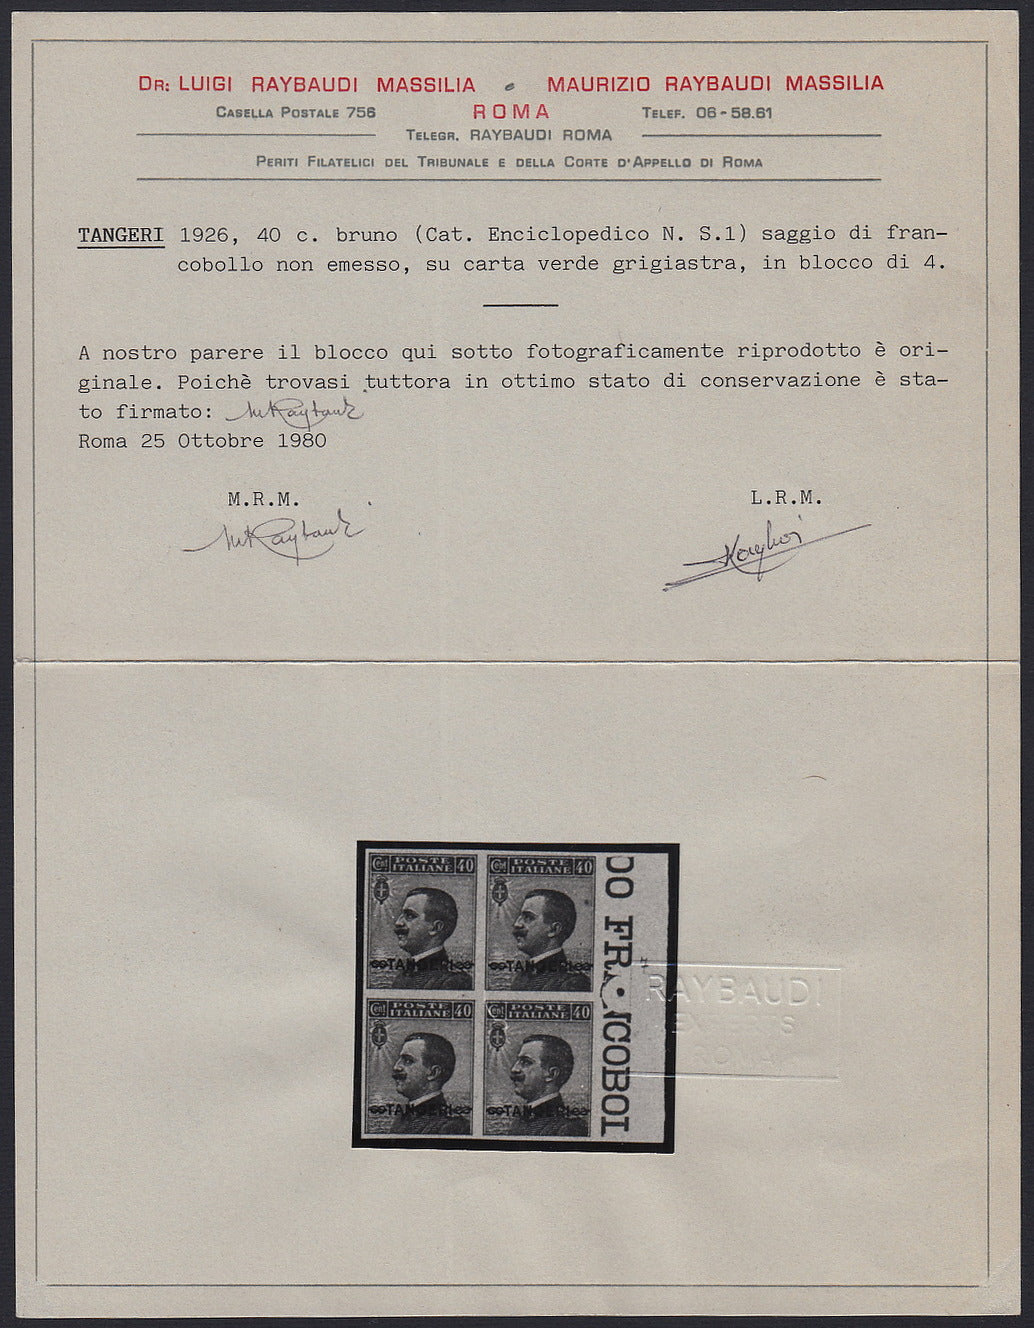 LevMar1 - 1926 - Morocco, Italian stamp no. 84 overprinted "TANGERI" between two Savoy knots, block of four new, non-gummed copies (S1) 